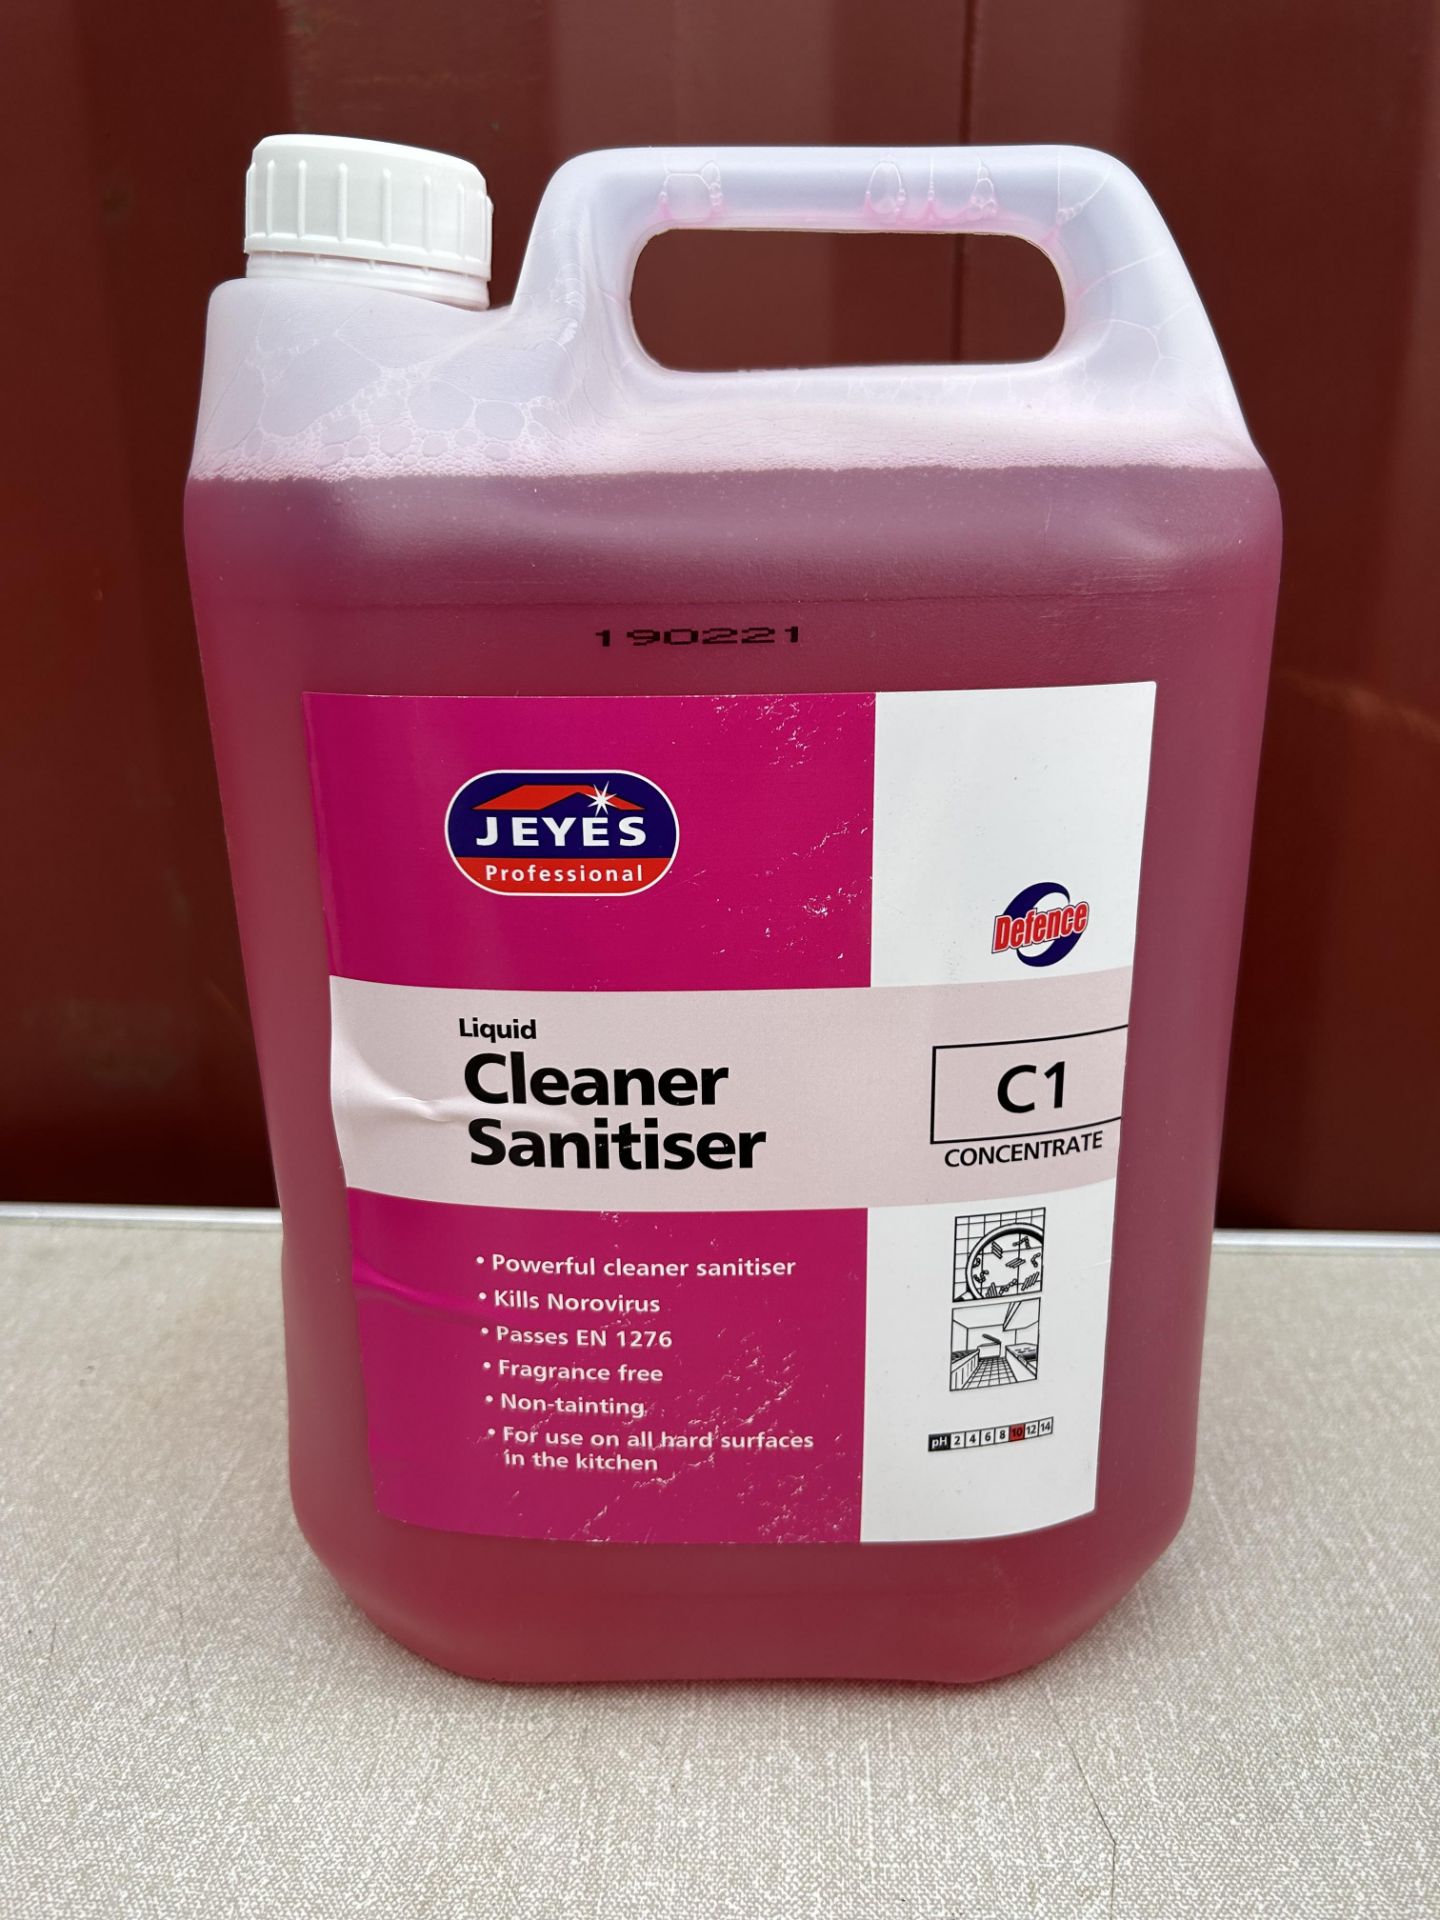 3x JEYES LIQUID CLEANER SANITISER C1 CONCENTRATE - 5L BRAND NEW